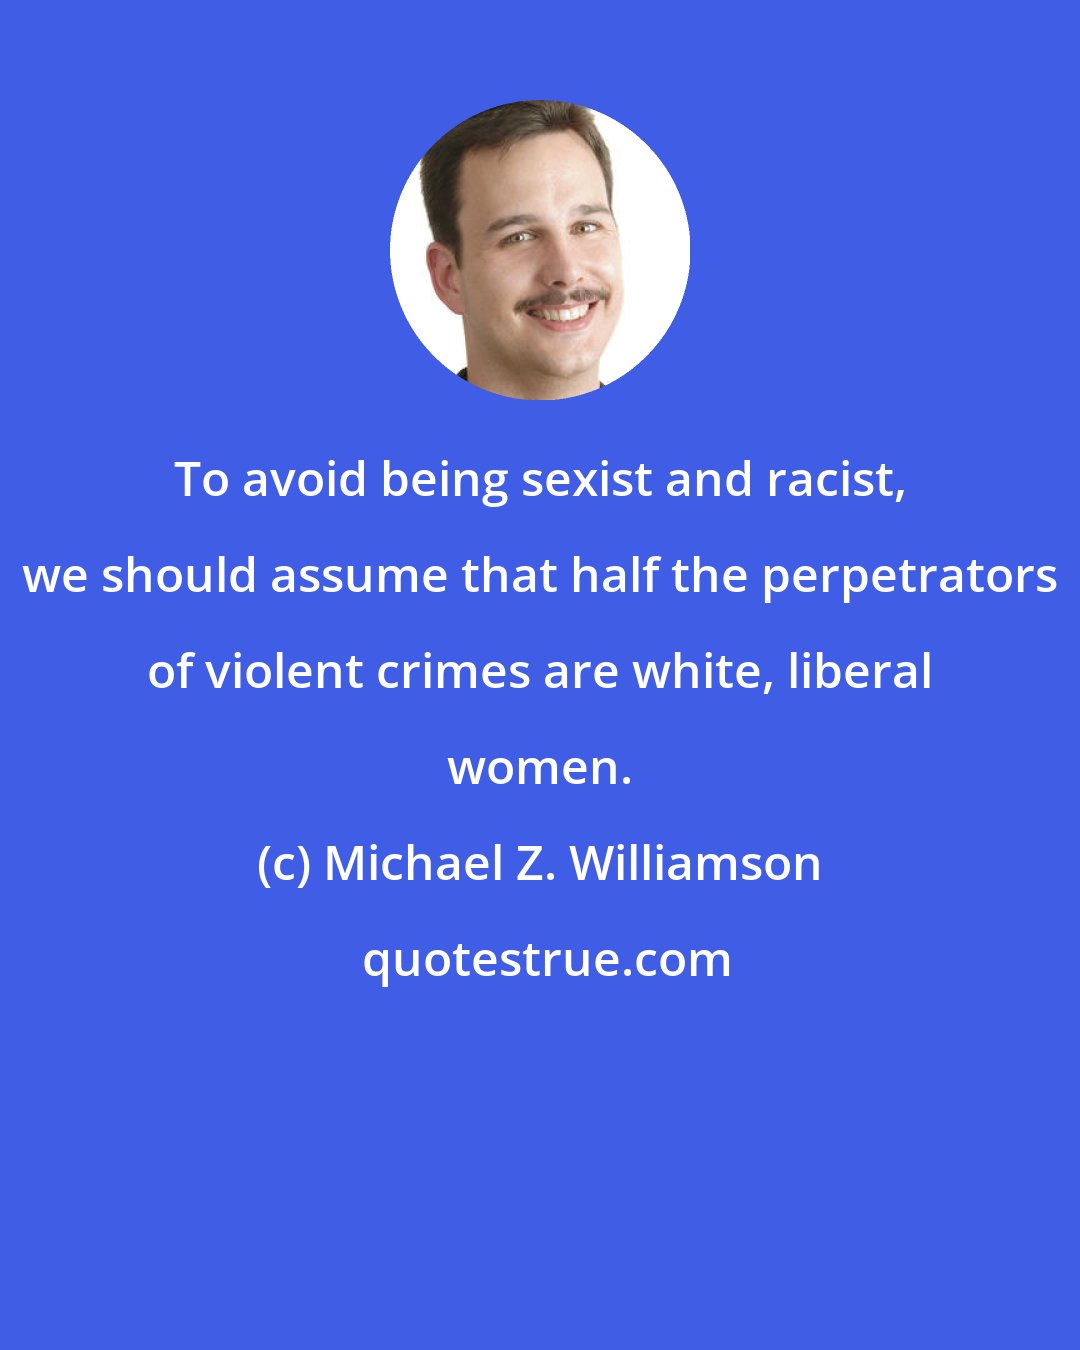 Michael Z. Williamson: To avoid being sexist and racist, we should assume that half the perpetrators of violent crimes are white, liberal women.